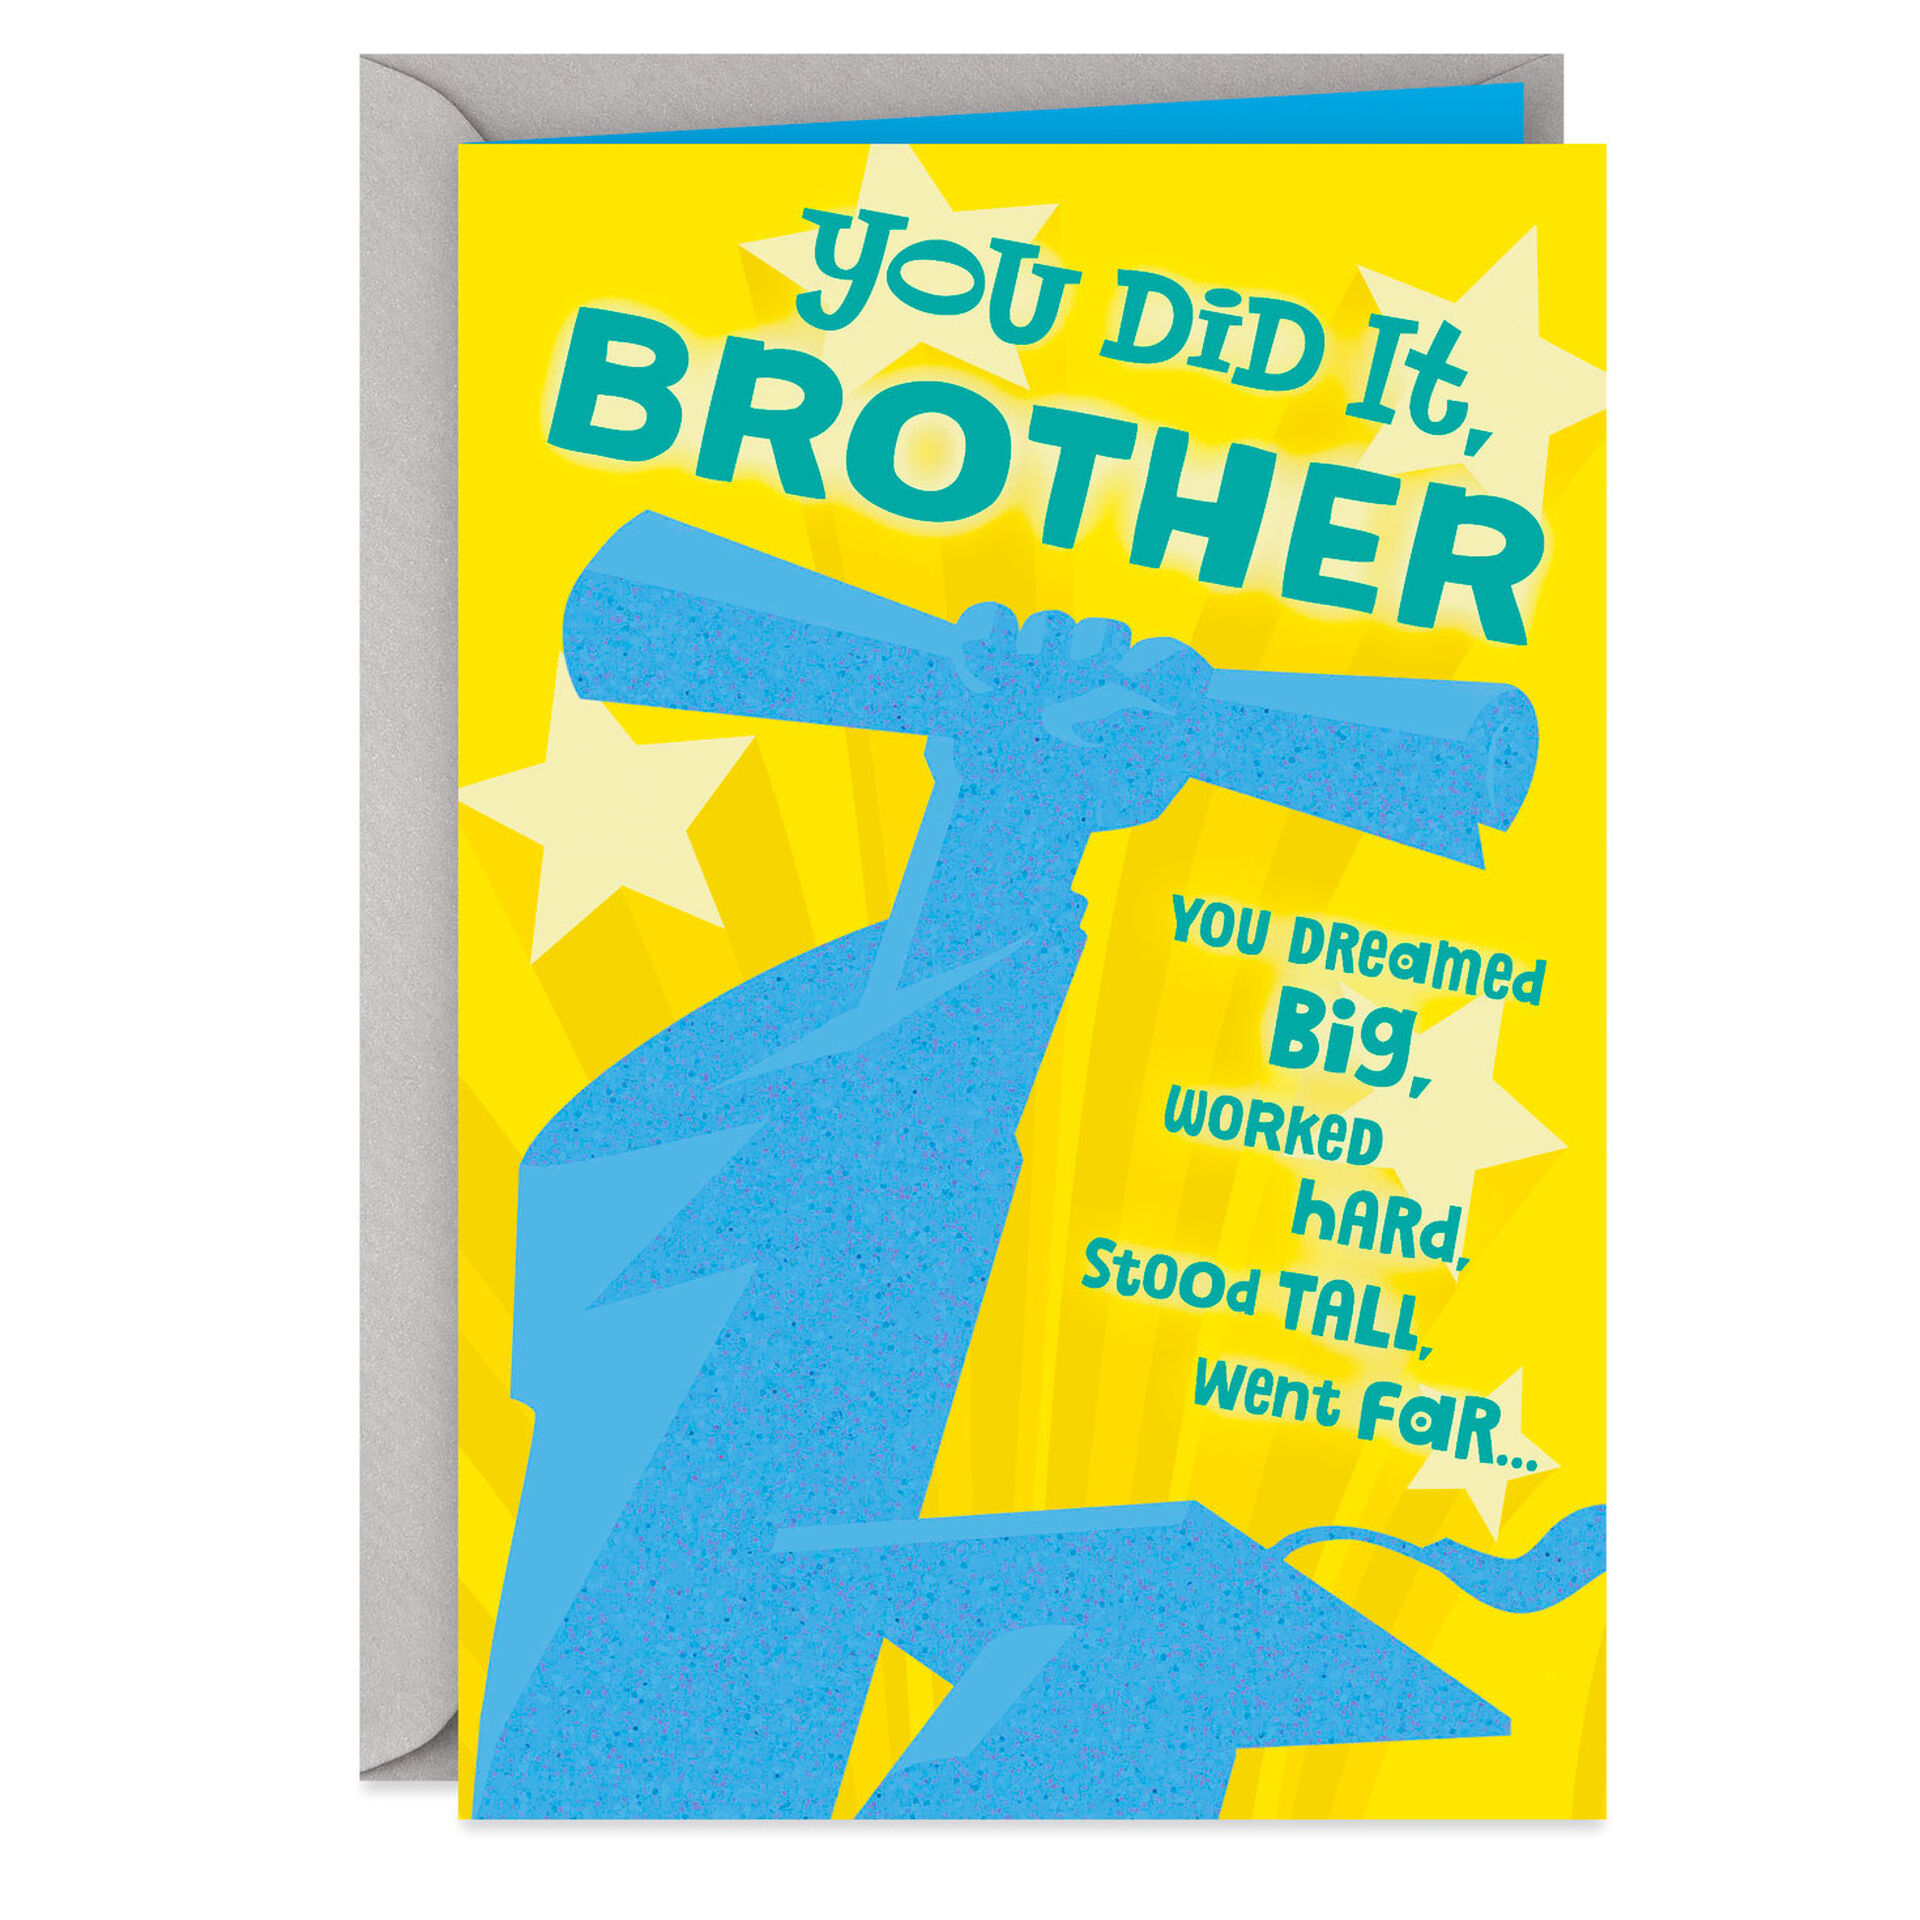 Blue-Grad-and-Gold-Stars-Graduation-Card-for-Brother_200GRV6064_01